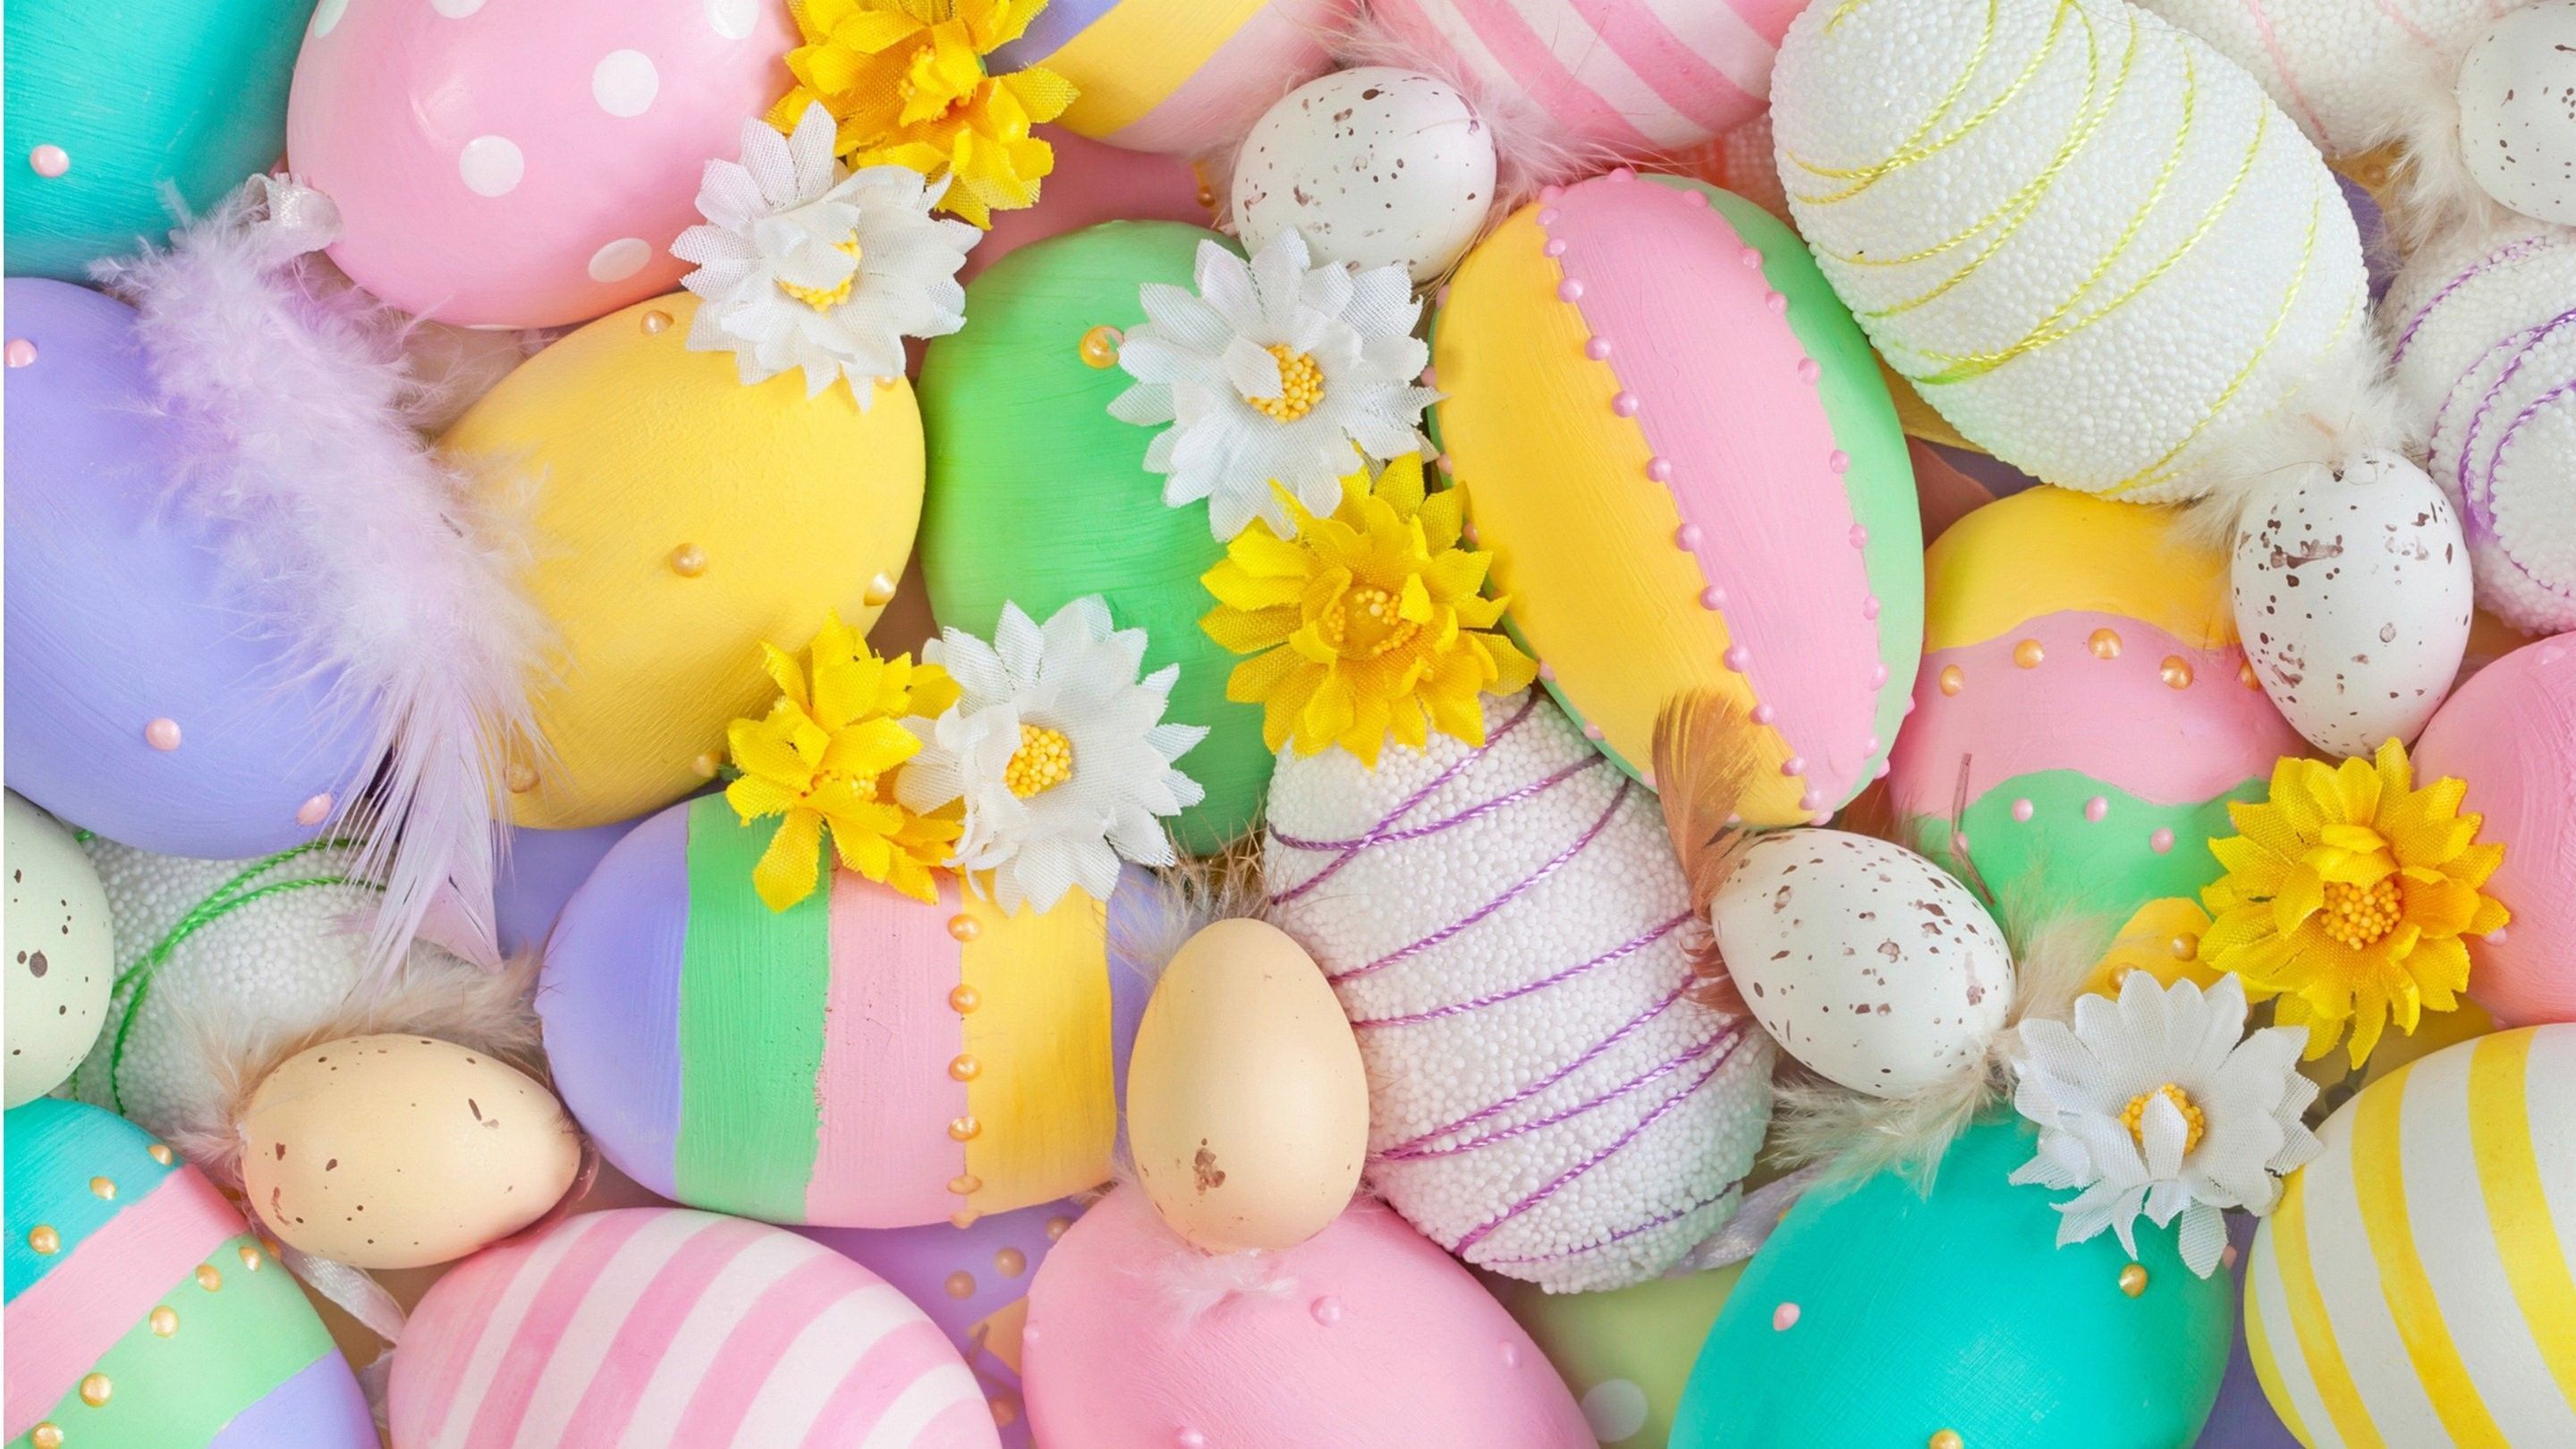 A colorful collection of easter eggs - Easter, egg